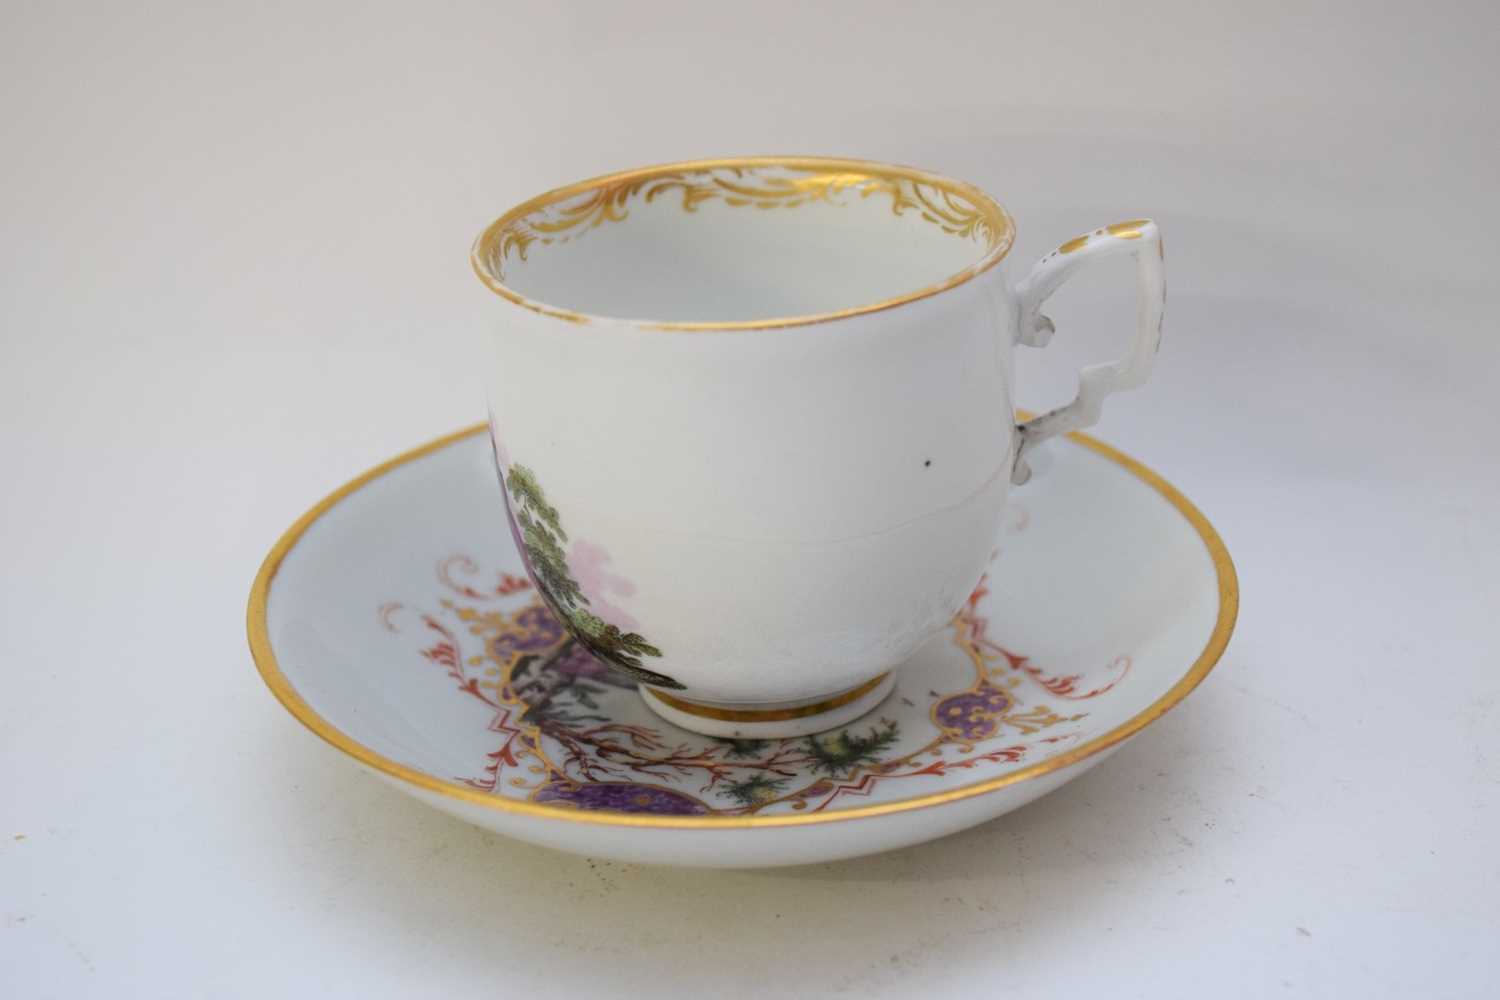 Vienna porcelain cup with Tau handle and a Samson saucer - Image 3 of 4